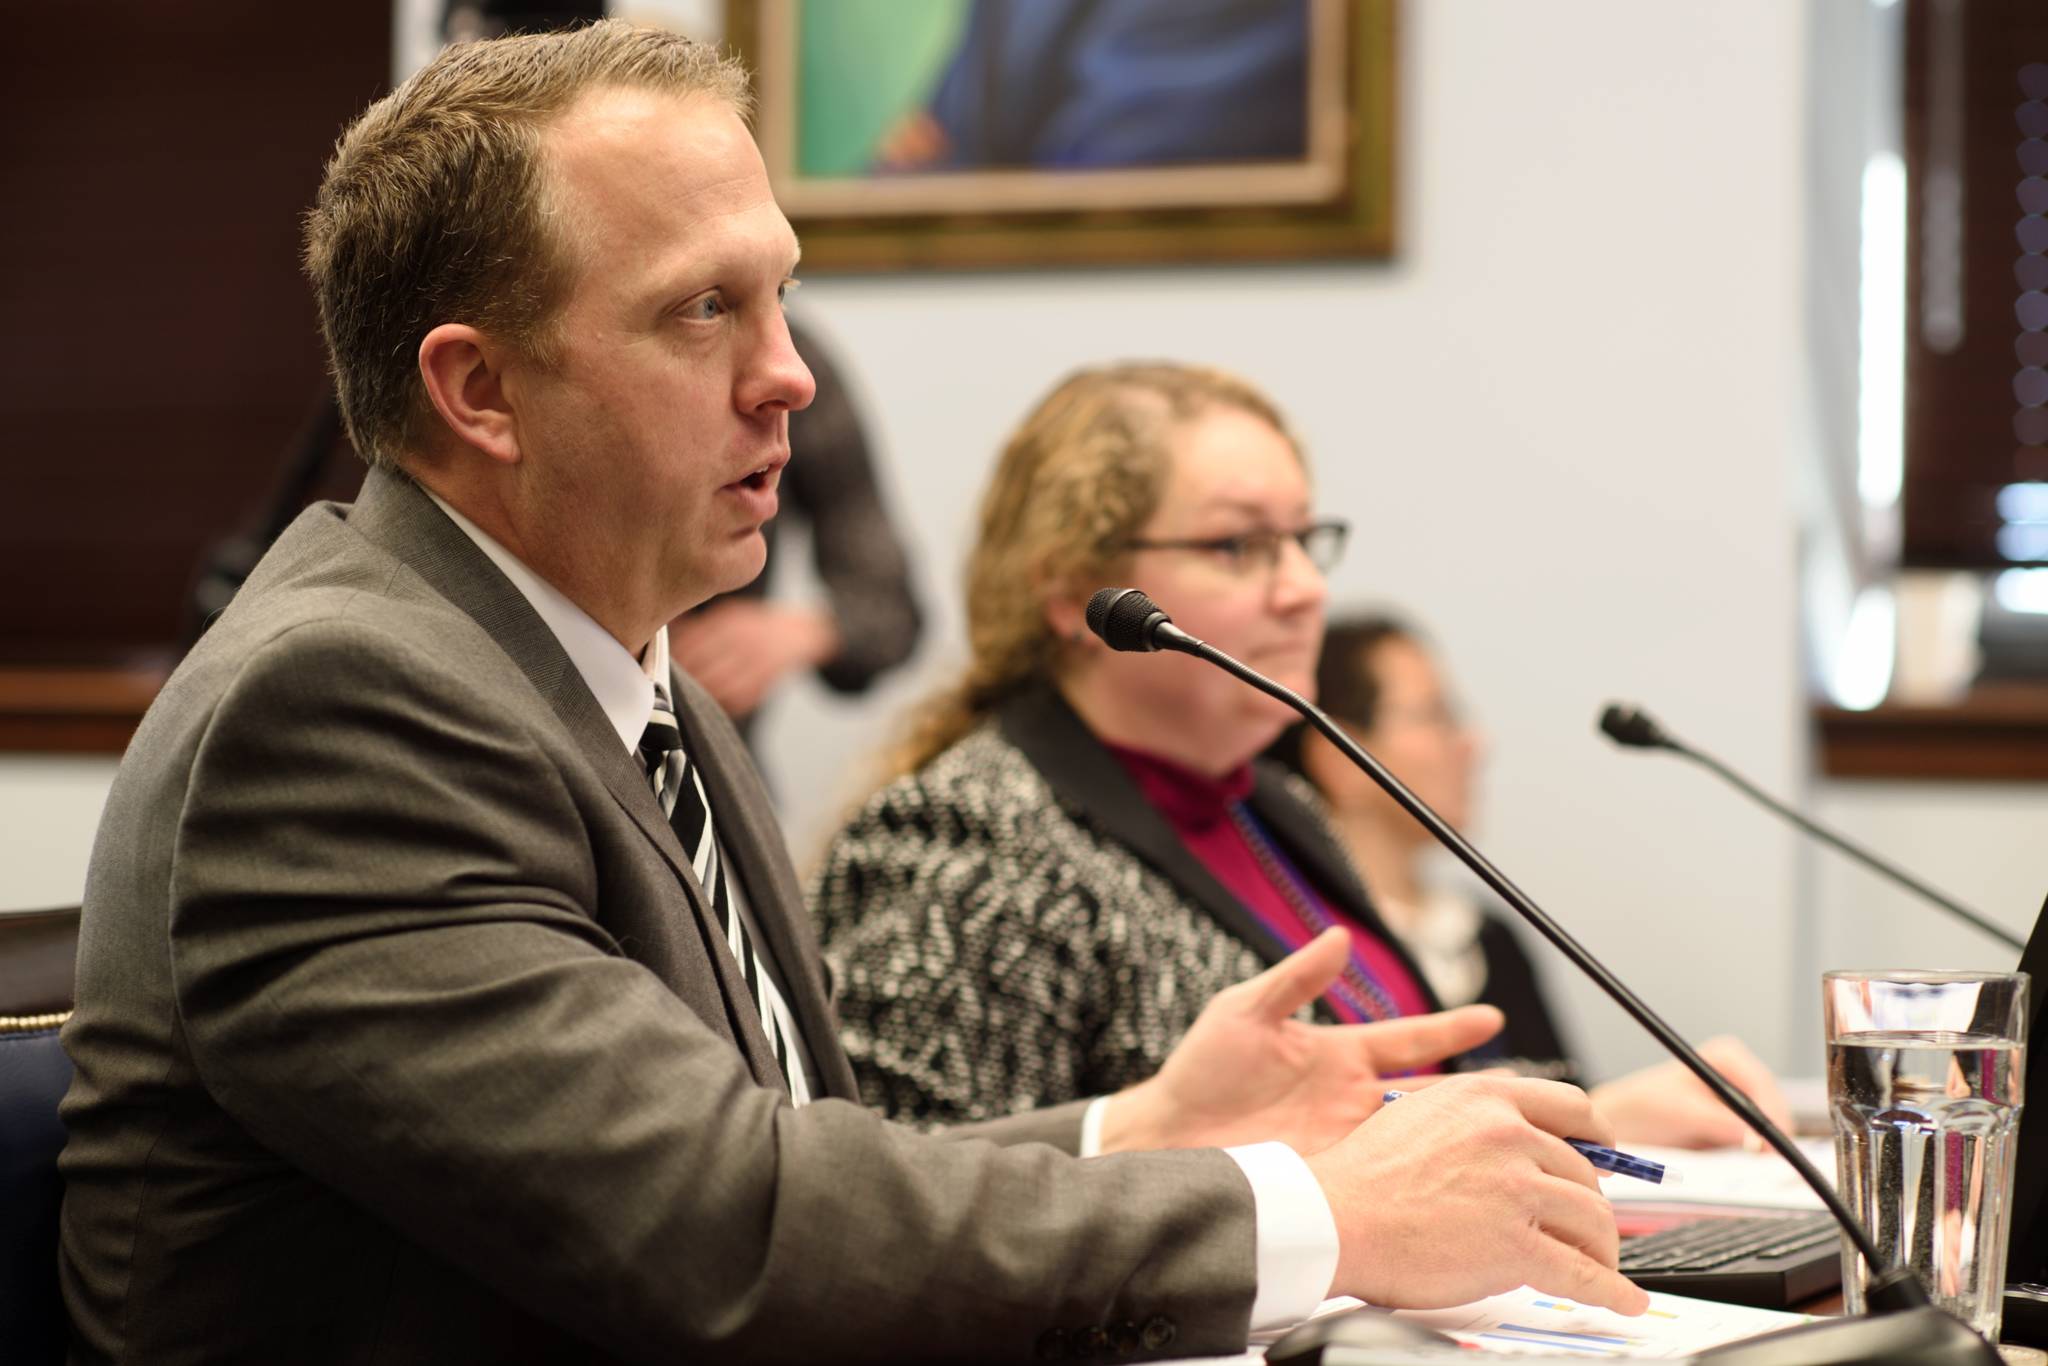 Matt McLaren, Business and Development Manager for the Alaska Marine Highway System, and Amanda Holland, Management Director for the Office of Management and Budget, make a presentation to the Senate Transportation Committee at the Capitol on Thursday, March 7, 2019. (Michael Penn | Juneau Empire)